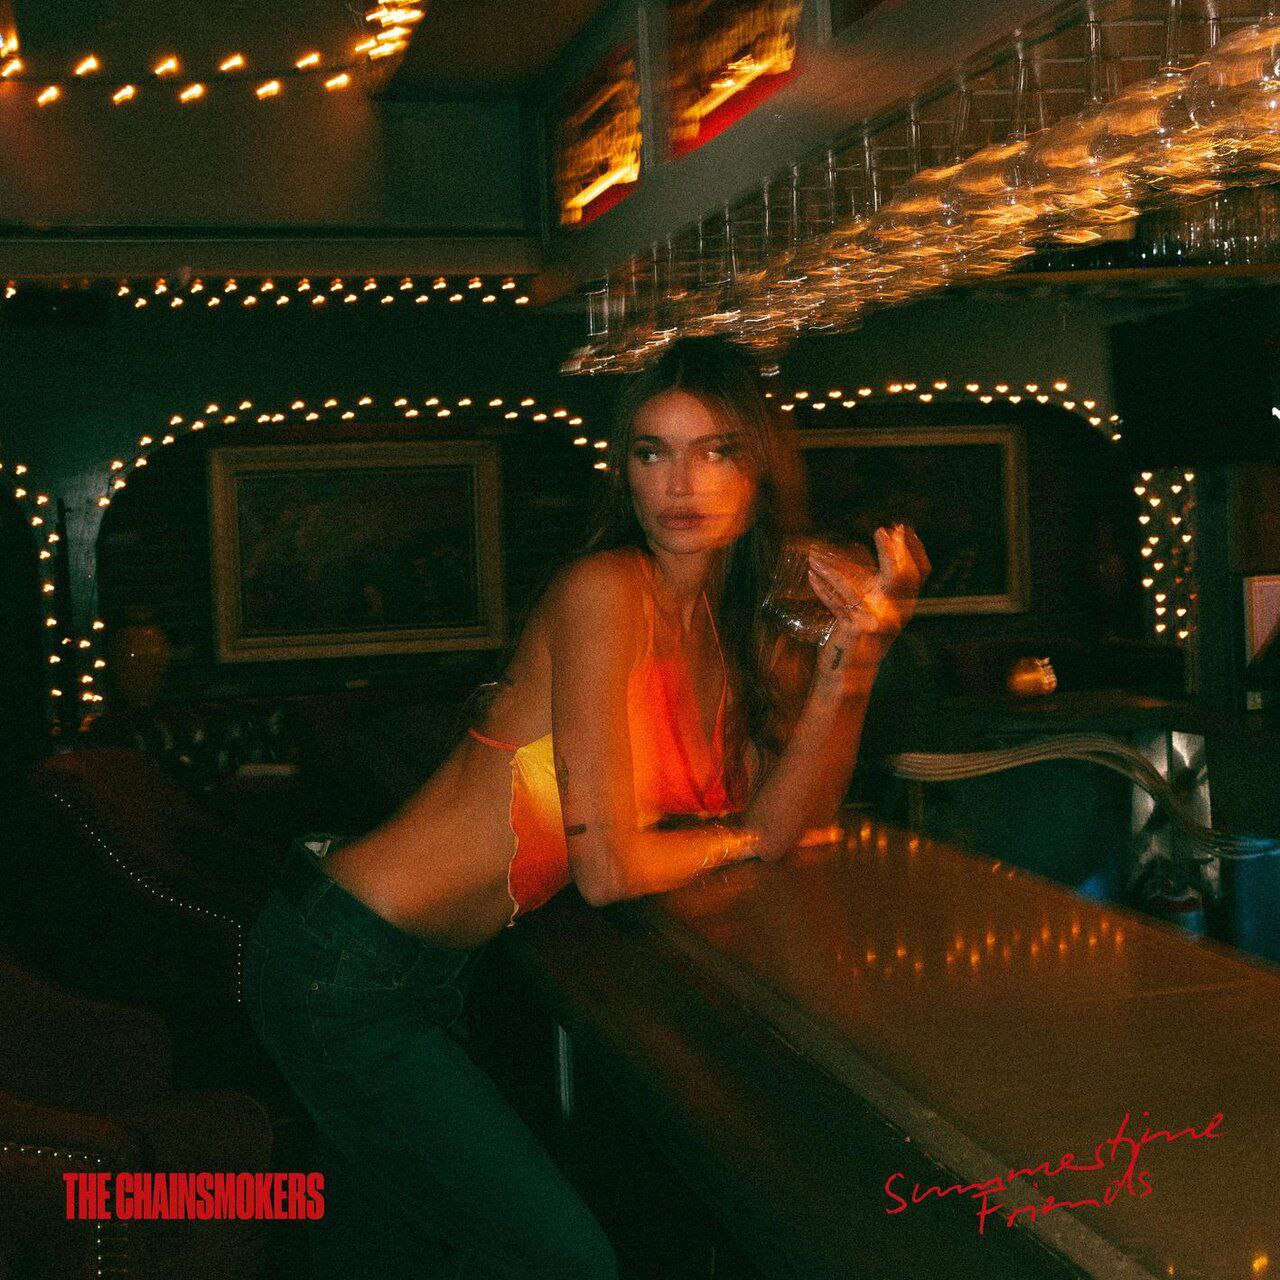 MP3: The Chainsmokers – Summertime Friends